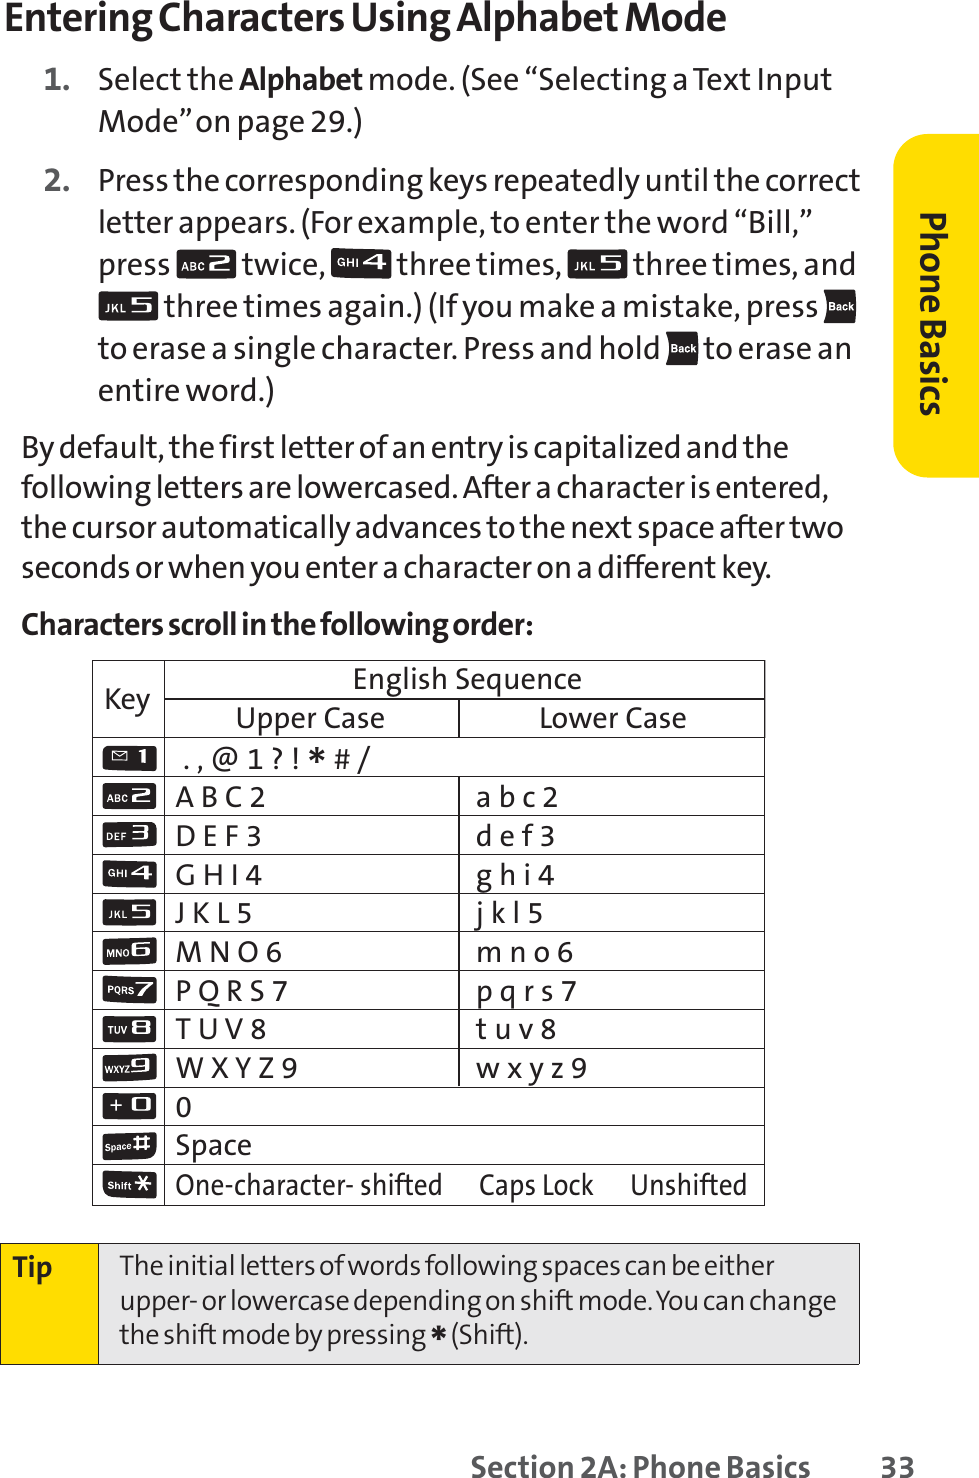 Section 2A: Phone Basics 33Entering Characters Using Alphabet Mode1. Select the Alphabet mode. (See “Selecting a Text InputMode”on page 29.) 2. Press the corresponding keys repeatedly until the correctletter appears. (For example, to enter the word “Bill,”press  twice,  three times,  three times, andthree times again.) (If you make a mistake, press to erase a single character. Press and hold  to erase anentire word.)By default, the first letter of an entry is capitalized and thefollowing letters are lowercased. After a character is entered,the cursor automatically advances to the next space after twoseconds or when you enter a character on a different key.Characters scroll in the following order:Tip The initial letters of words following spaces can be eitherupper- or lowercase depending on shift mode. You can changethe shift mode by pressing *(Shift).English SequenceUpper CaseKey.,@1?!*#/ABC2DEF3GHI4JKL5MNO6PQRS7TUV8WXYZ9abc2def3ghi4jkl5mno6pqrs7tuv8wxyz90SpaceOne-character- shifted      Caps Lock      UnshiftedLower CasePhone Basics